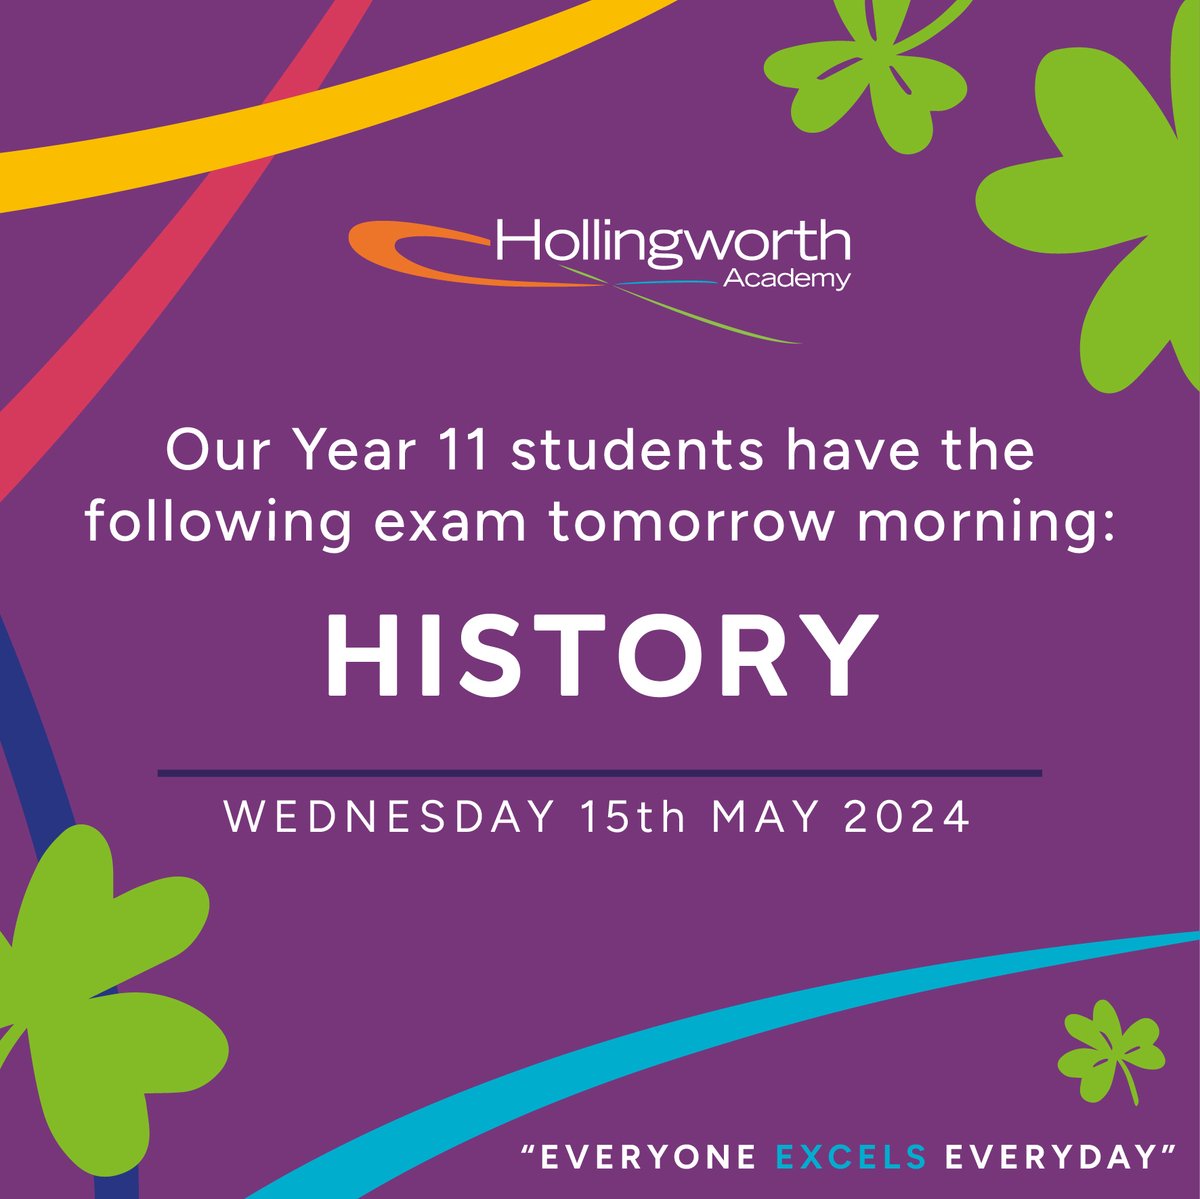 “Good luck to all our Historians for the Paper 1 exam. You've worked hard to learn as much as you can about the USA and Cold War topics. Go for it!” – The History Department 🍀✨ @WCSQM #raisingrochdale #worldclass #everyoneexcelseveryday